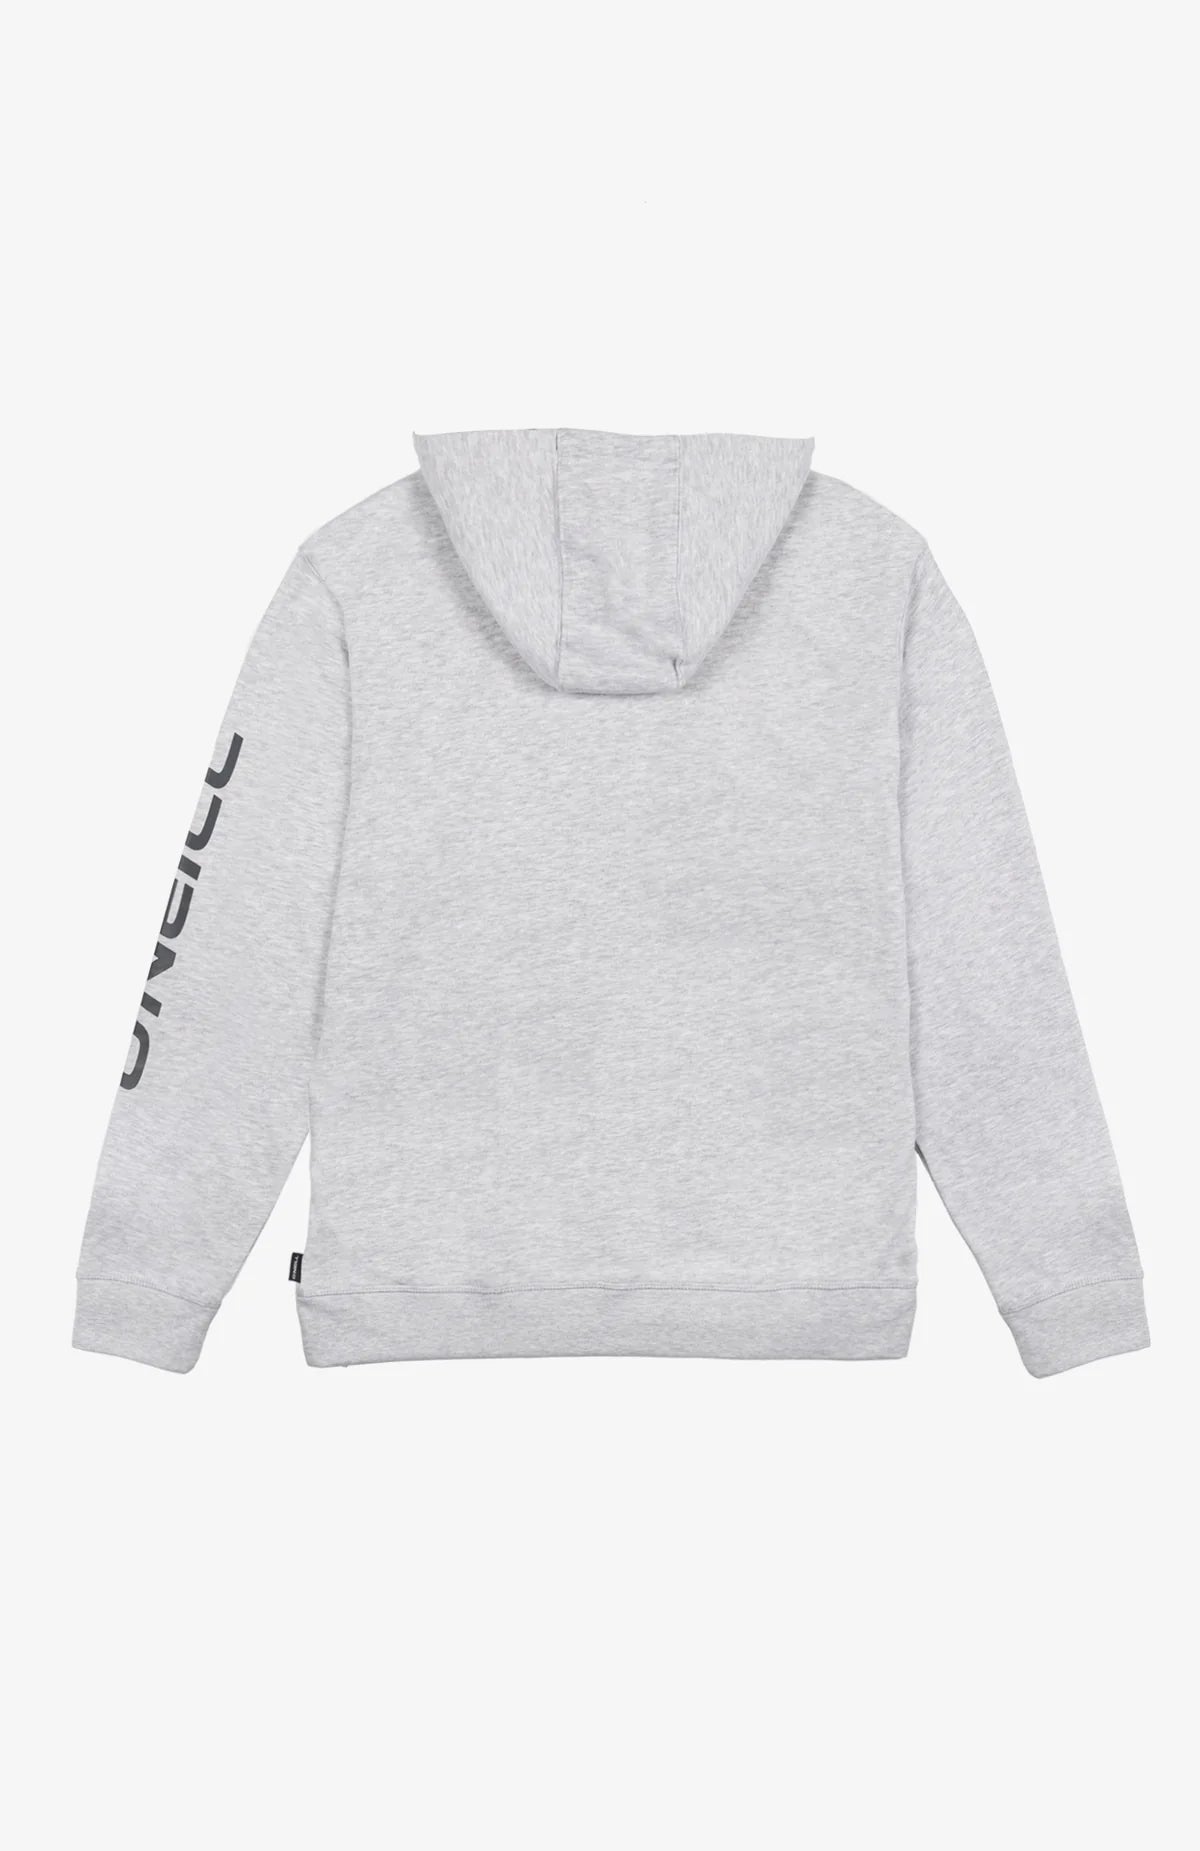 O'Neill Clean & Mean Hoodie (Non-Current)